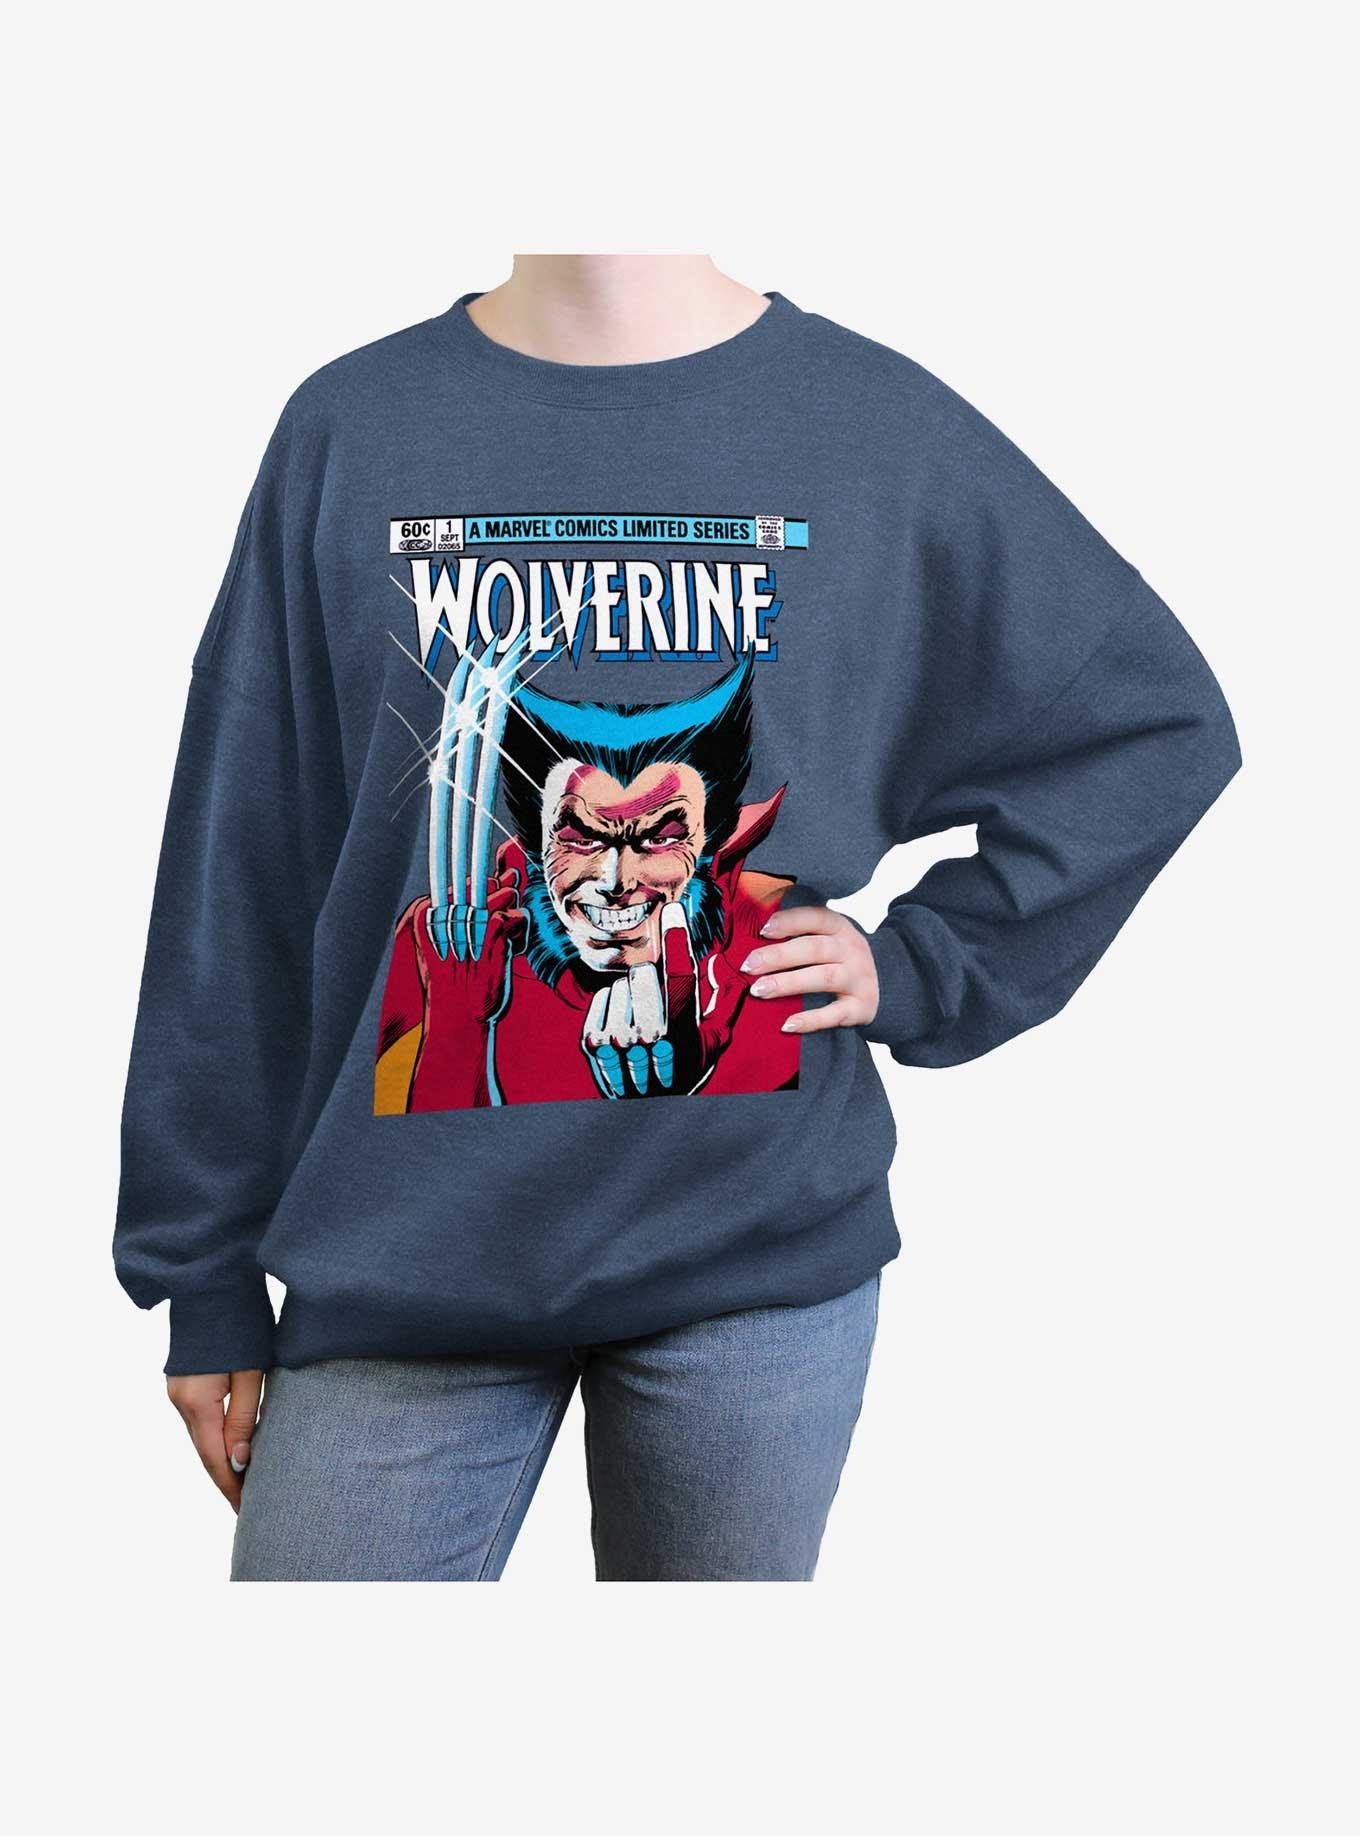 Wolverine 1st Issue Comic Cover Womens Oversized Sweatshirt, BLUEHTR, hi-res